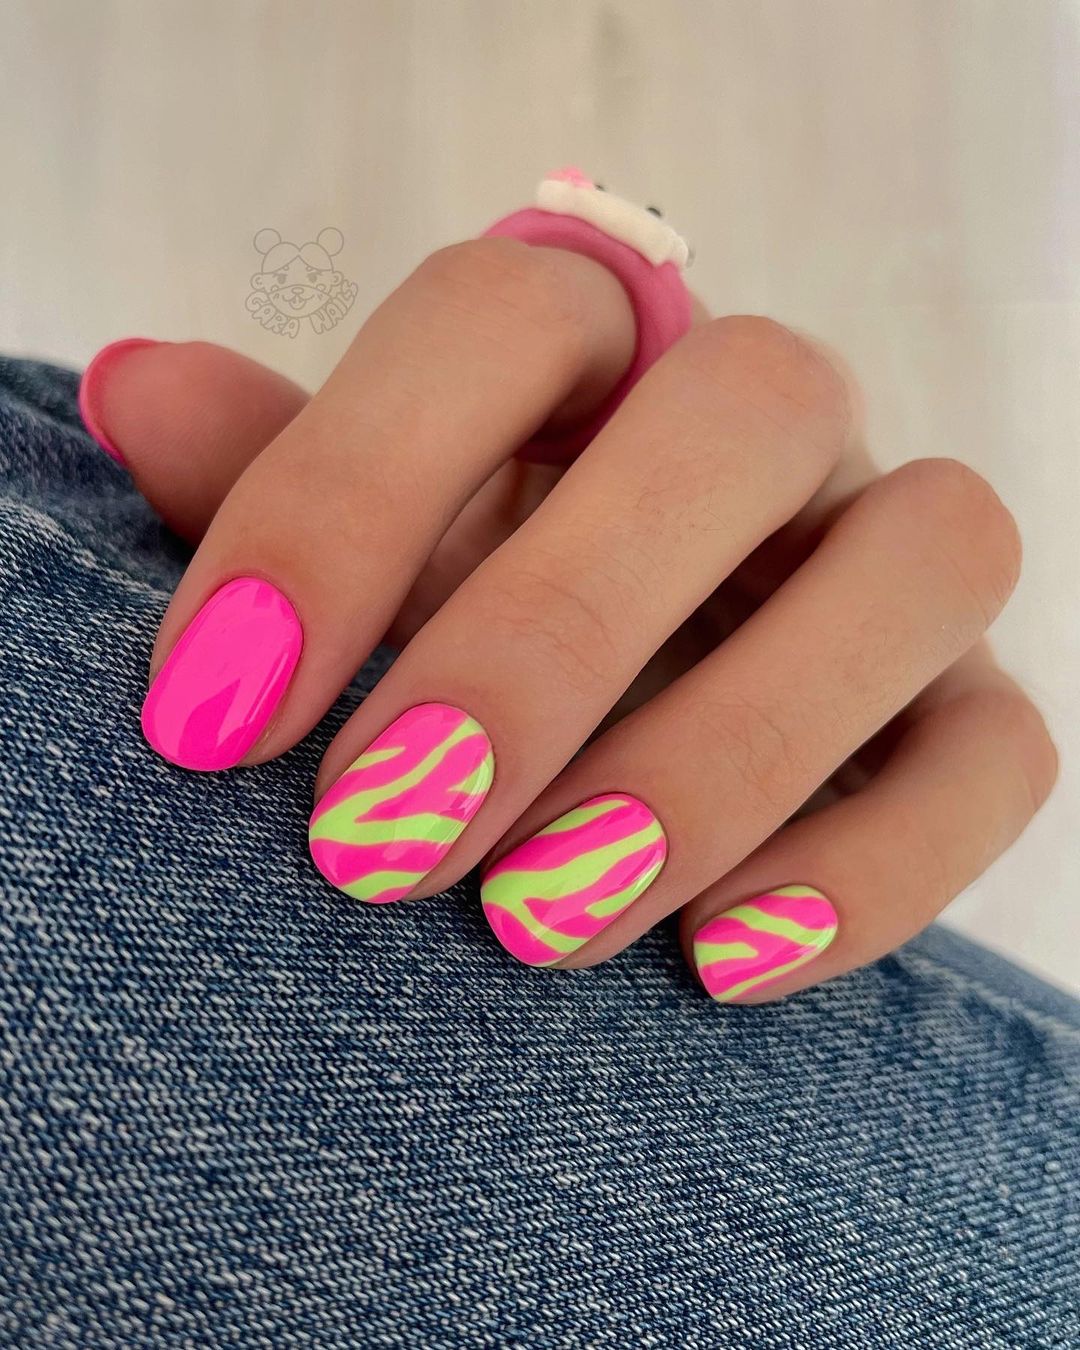 43 Spectacular Pink Nails for Your Cute Summer Manicure